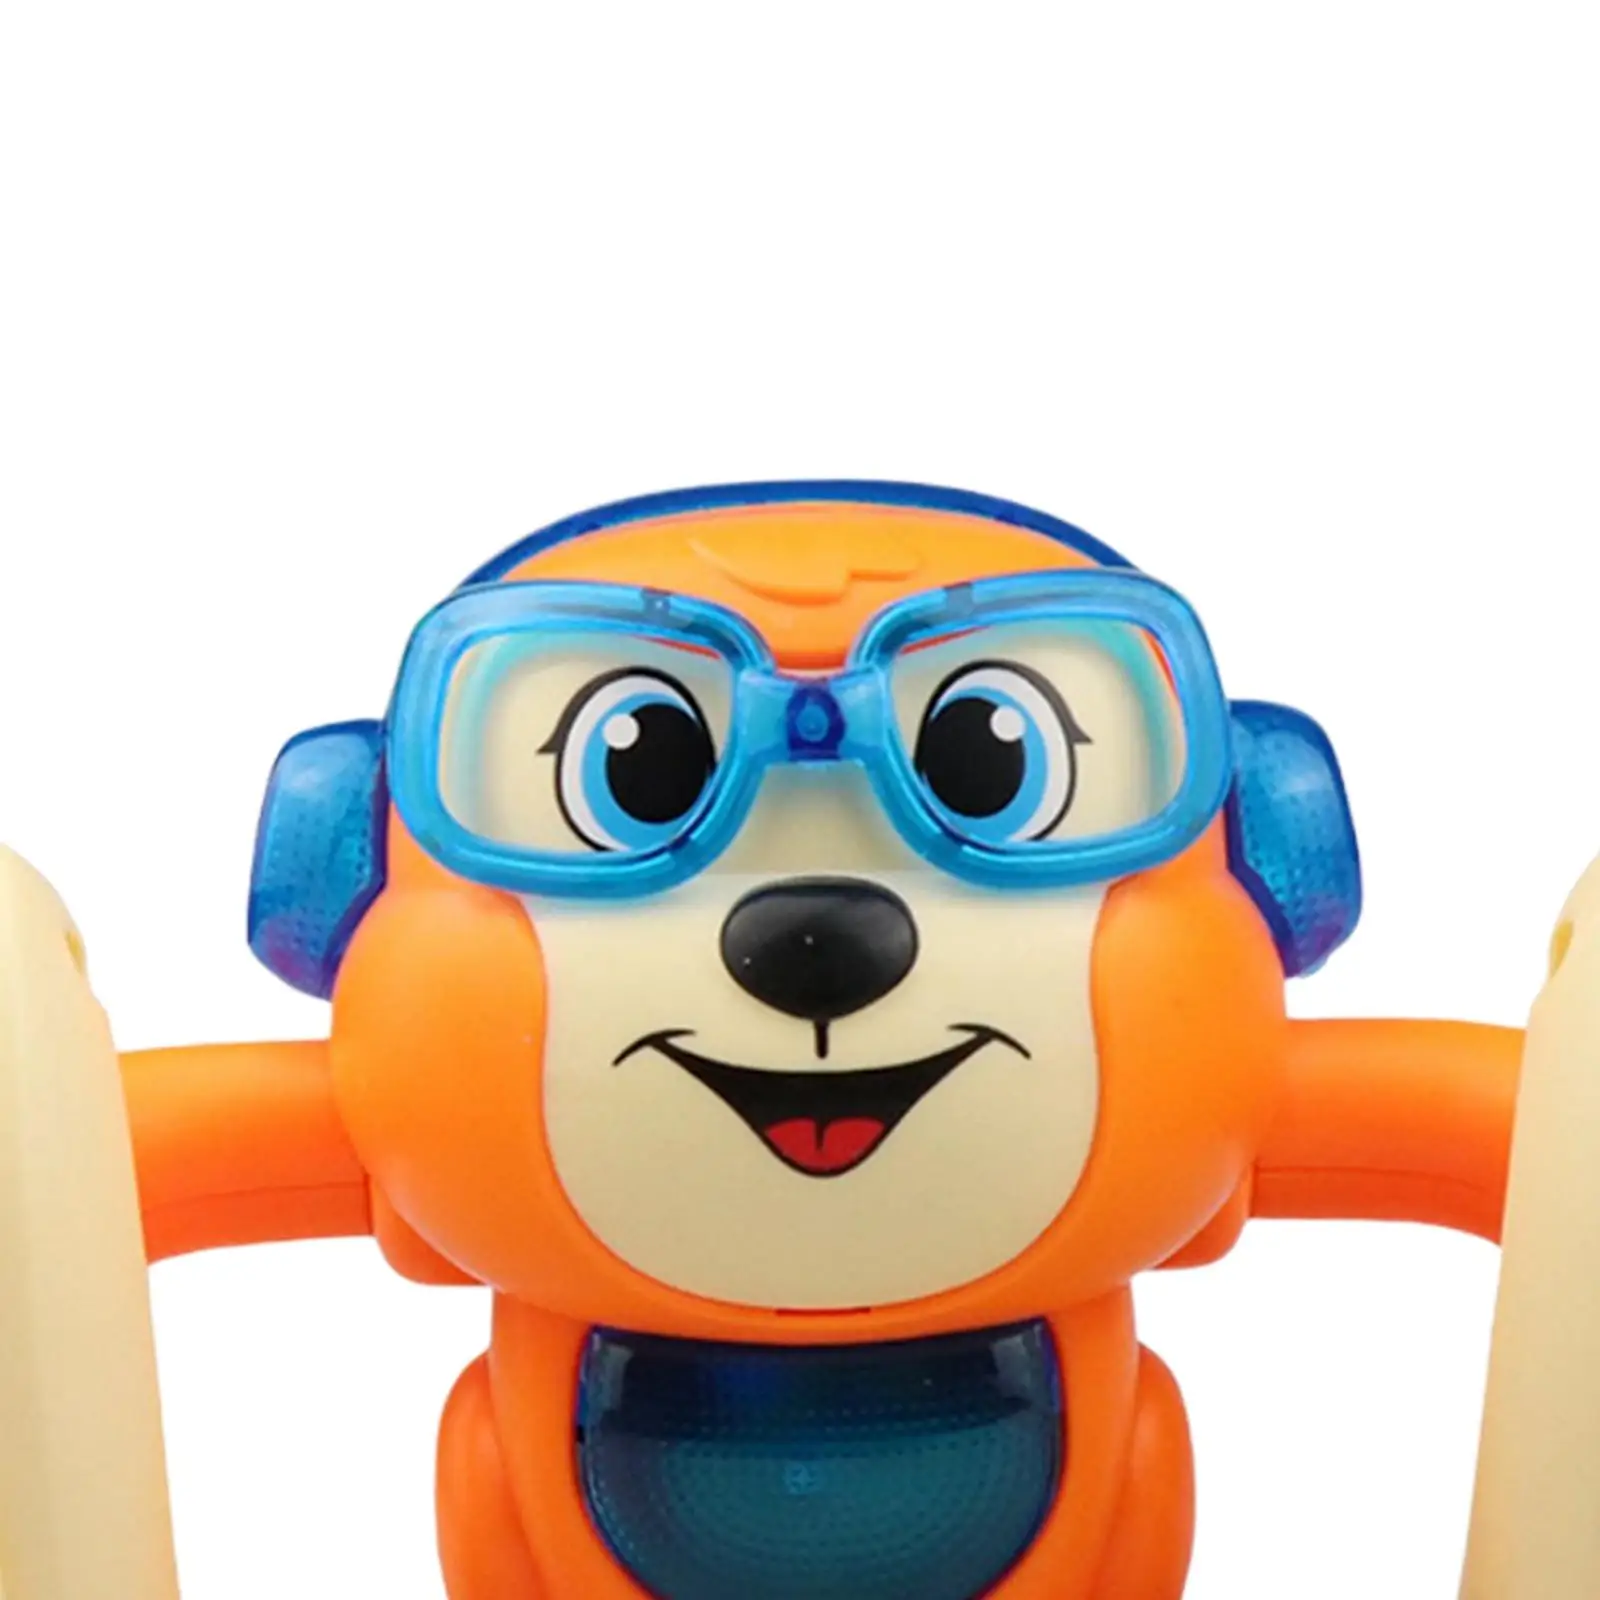 Monkey Musical Toys Walk Interactive Toy Monkey Crawling Baby Toy Funny Voice Control Roll Over Monkey Toys